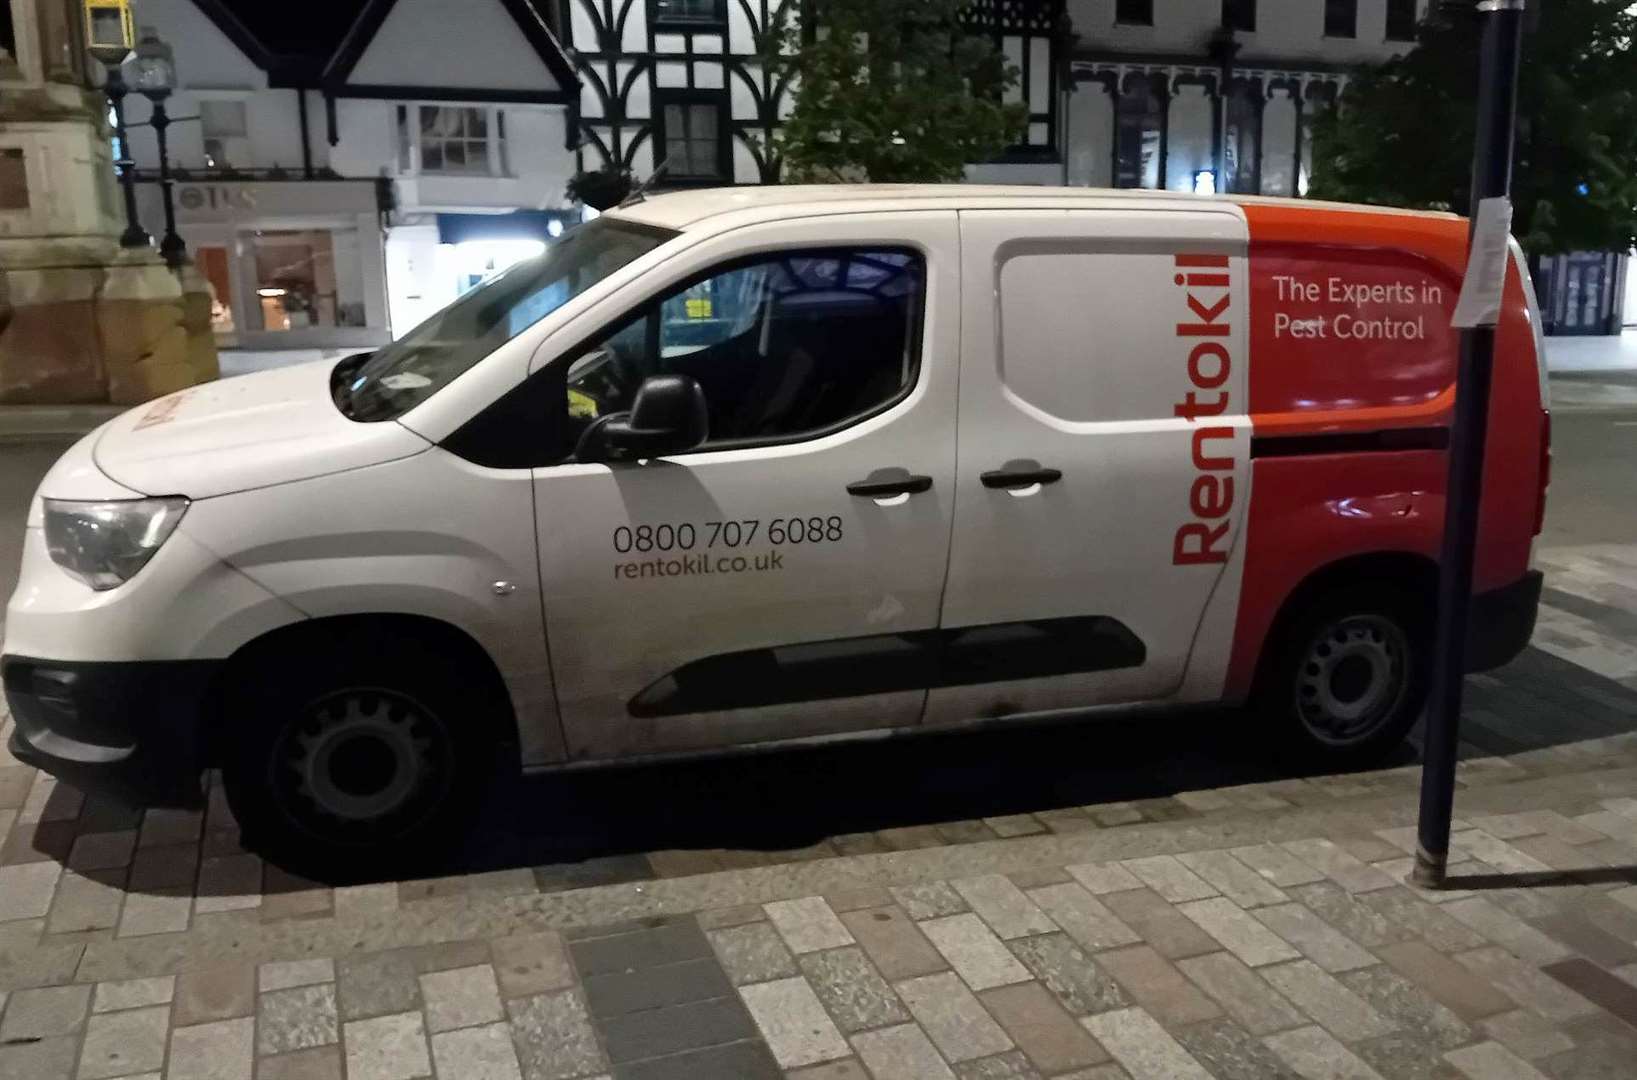 A Rentokill van was parked out the Wetherspoons pub in May. Picture: Eddie Waddell